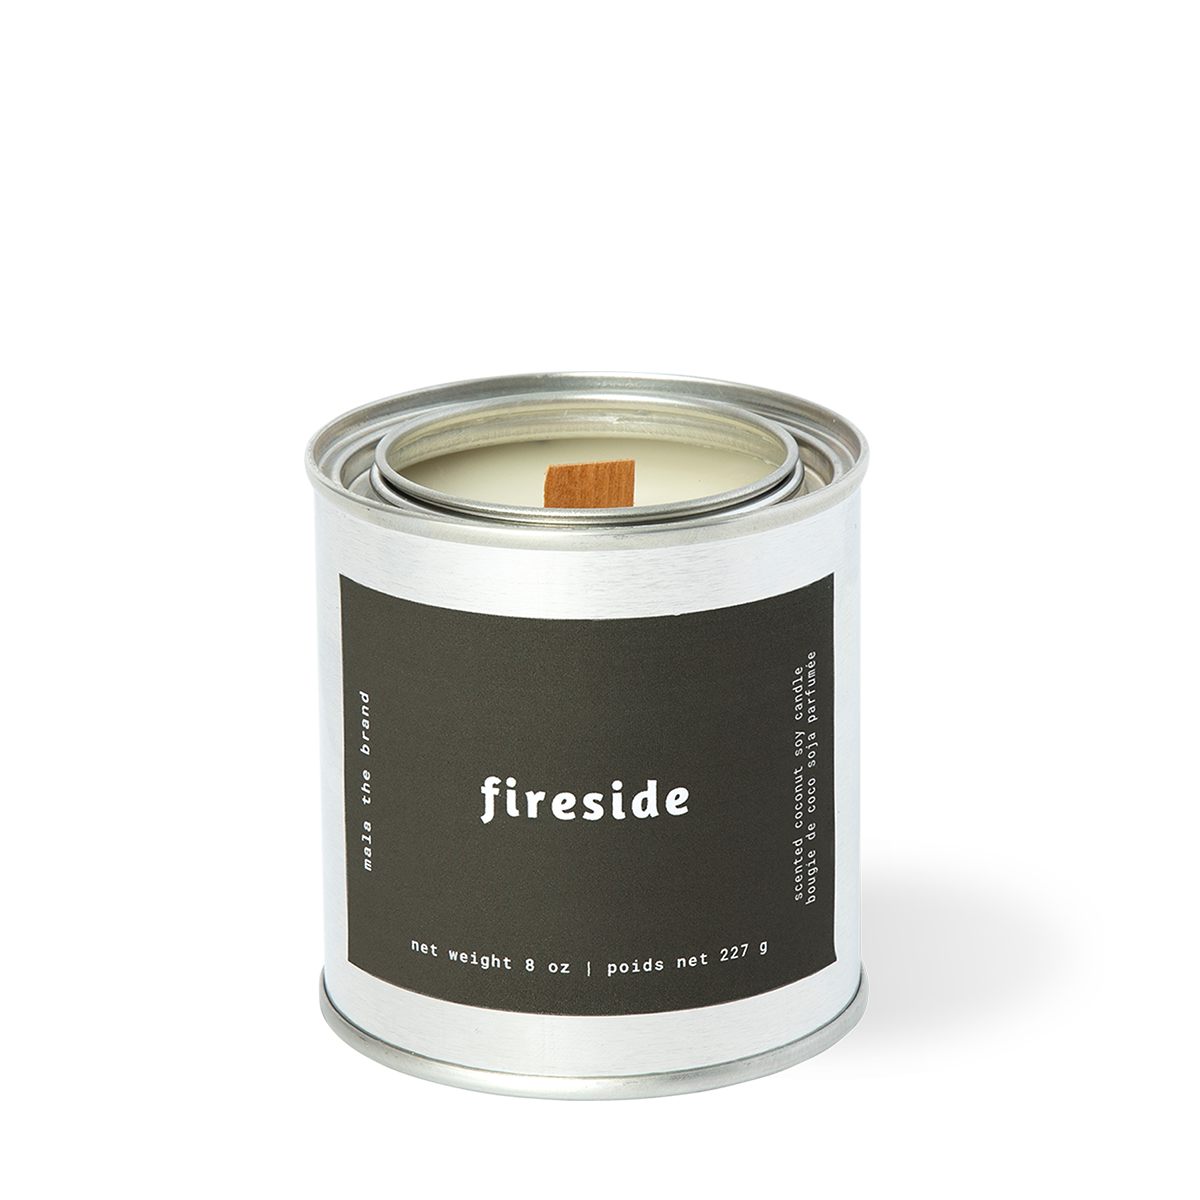 Image of candle with black label and white text says, "Fireside". 